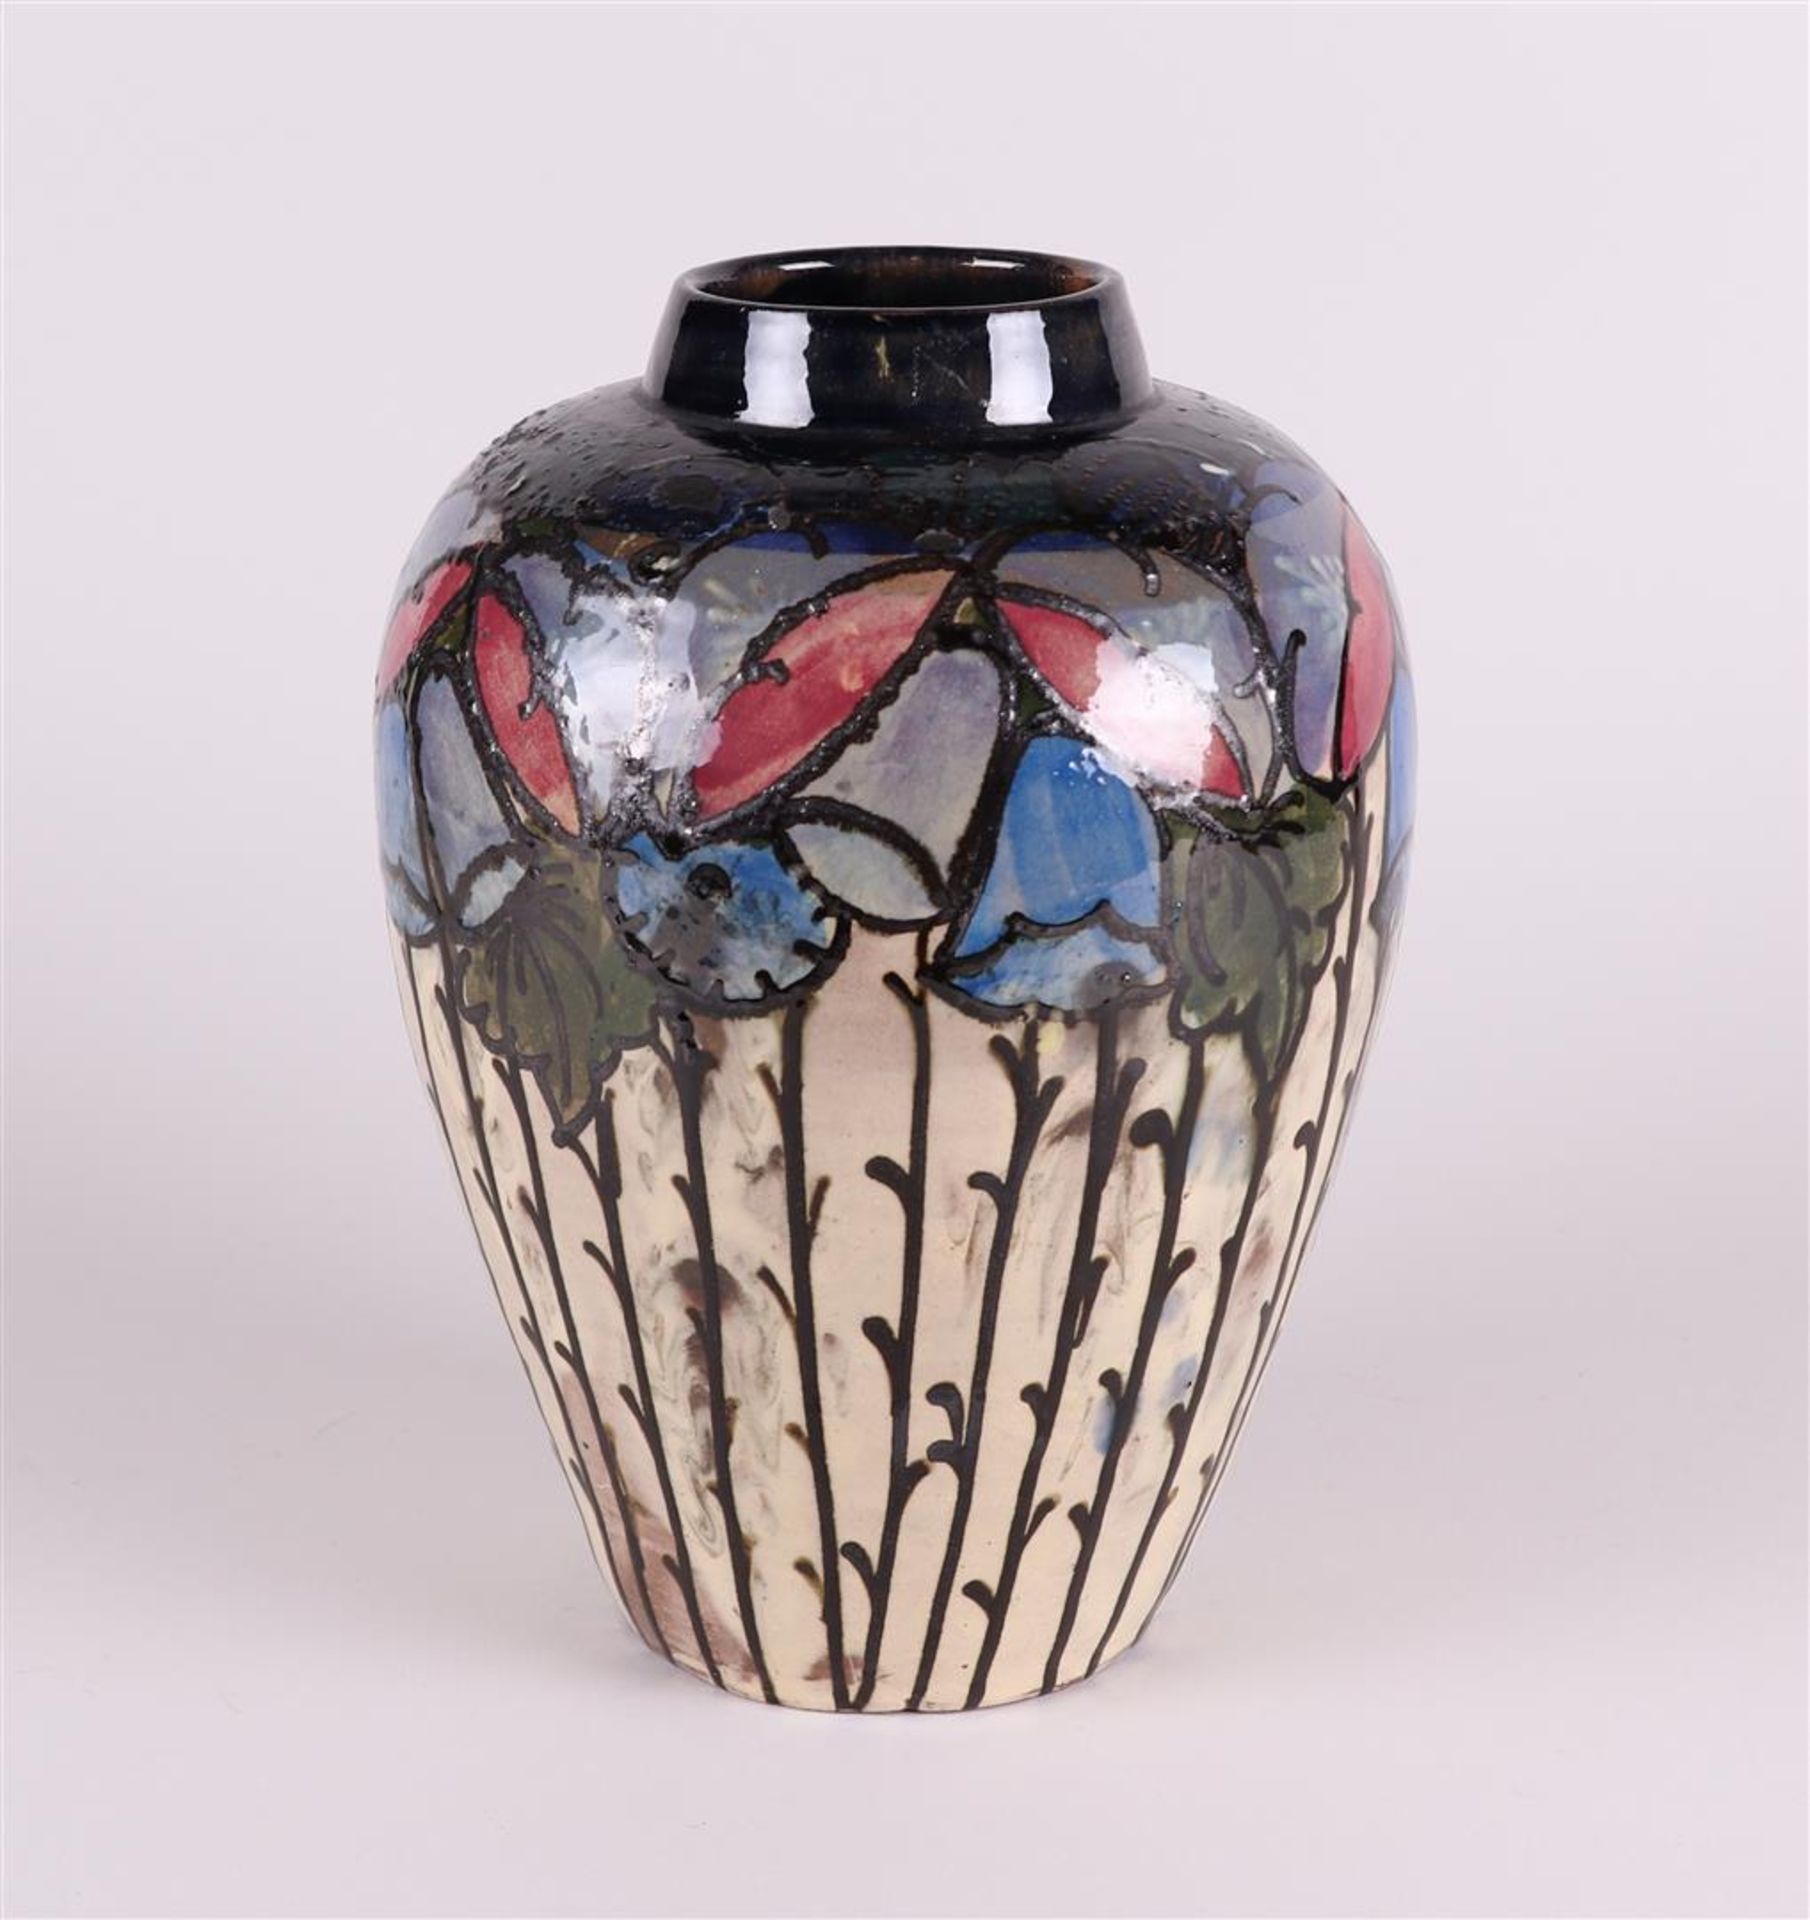 An Art Nouveau style polychrome painted earthenware vase, marked: "Bovey". Early 20th century. - Image 3 of 4